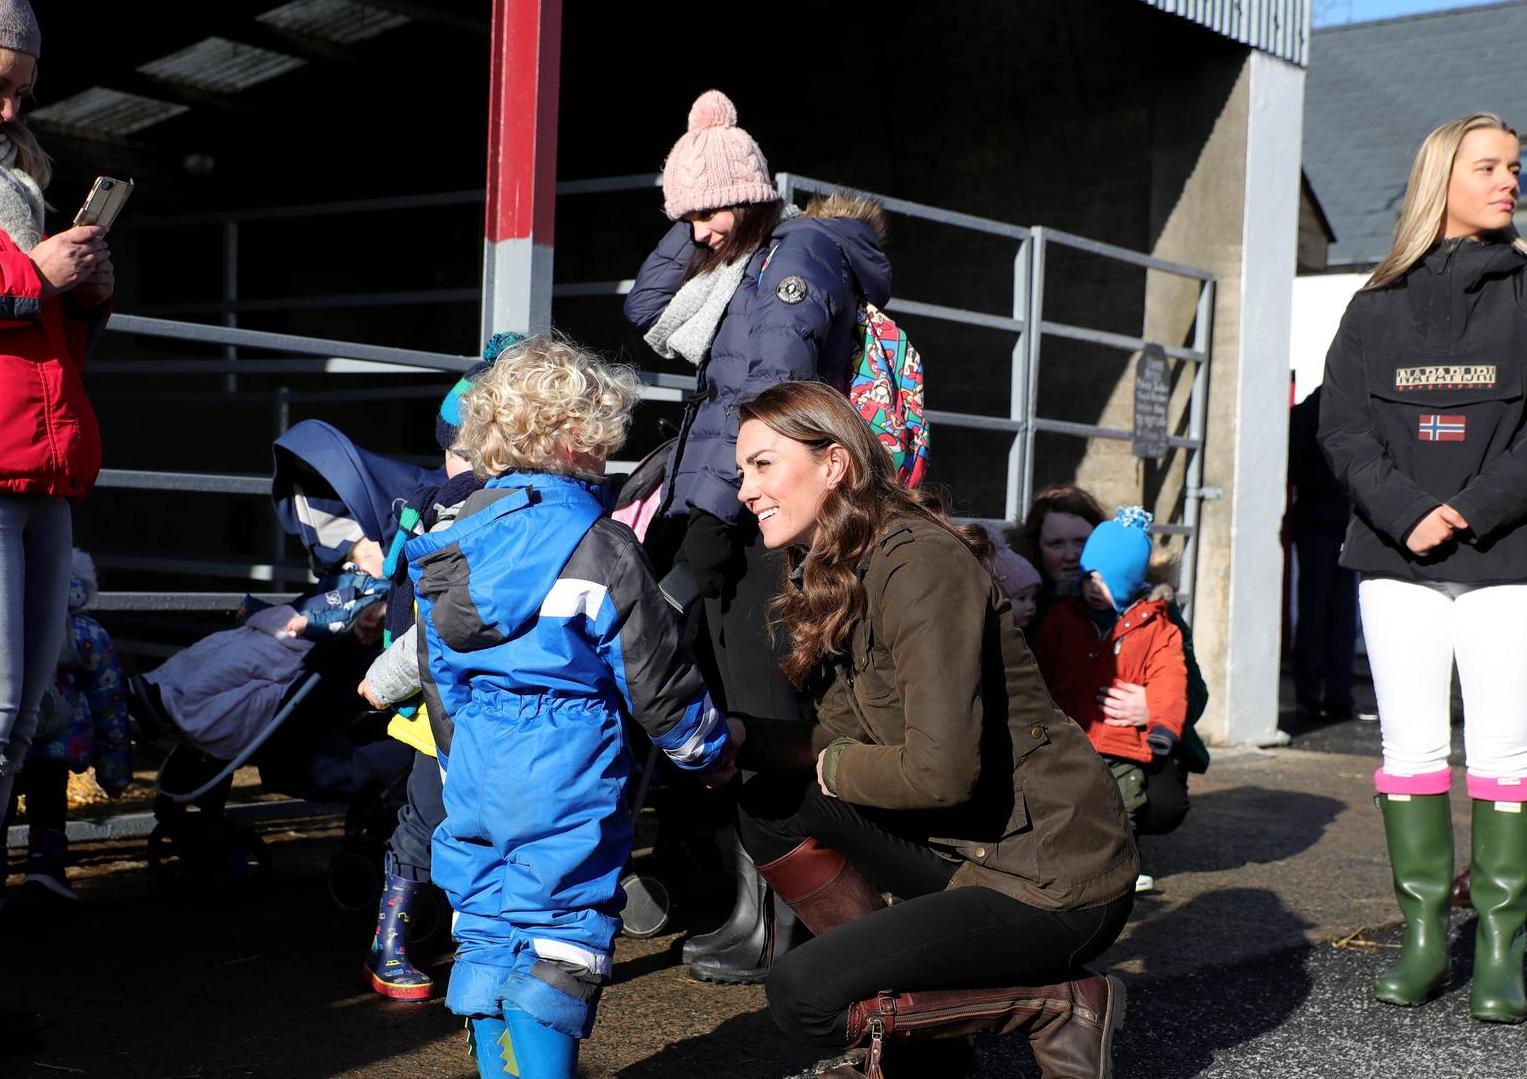 The Duchess of Cambridge meets members of the public at the Ark Open Farm, in Newtownards, near Belfast, during a visit to meet with parents and grandparents to discuss their experiences of raising young children for her Early Childhood survey